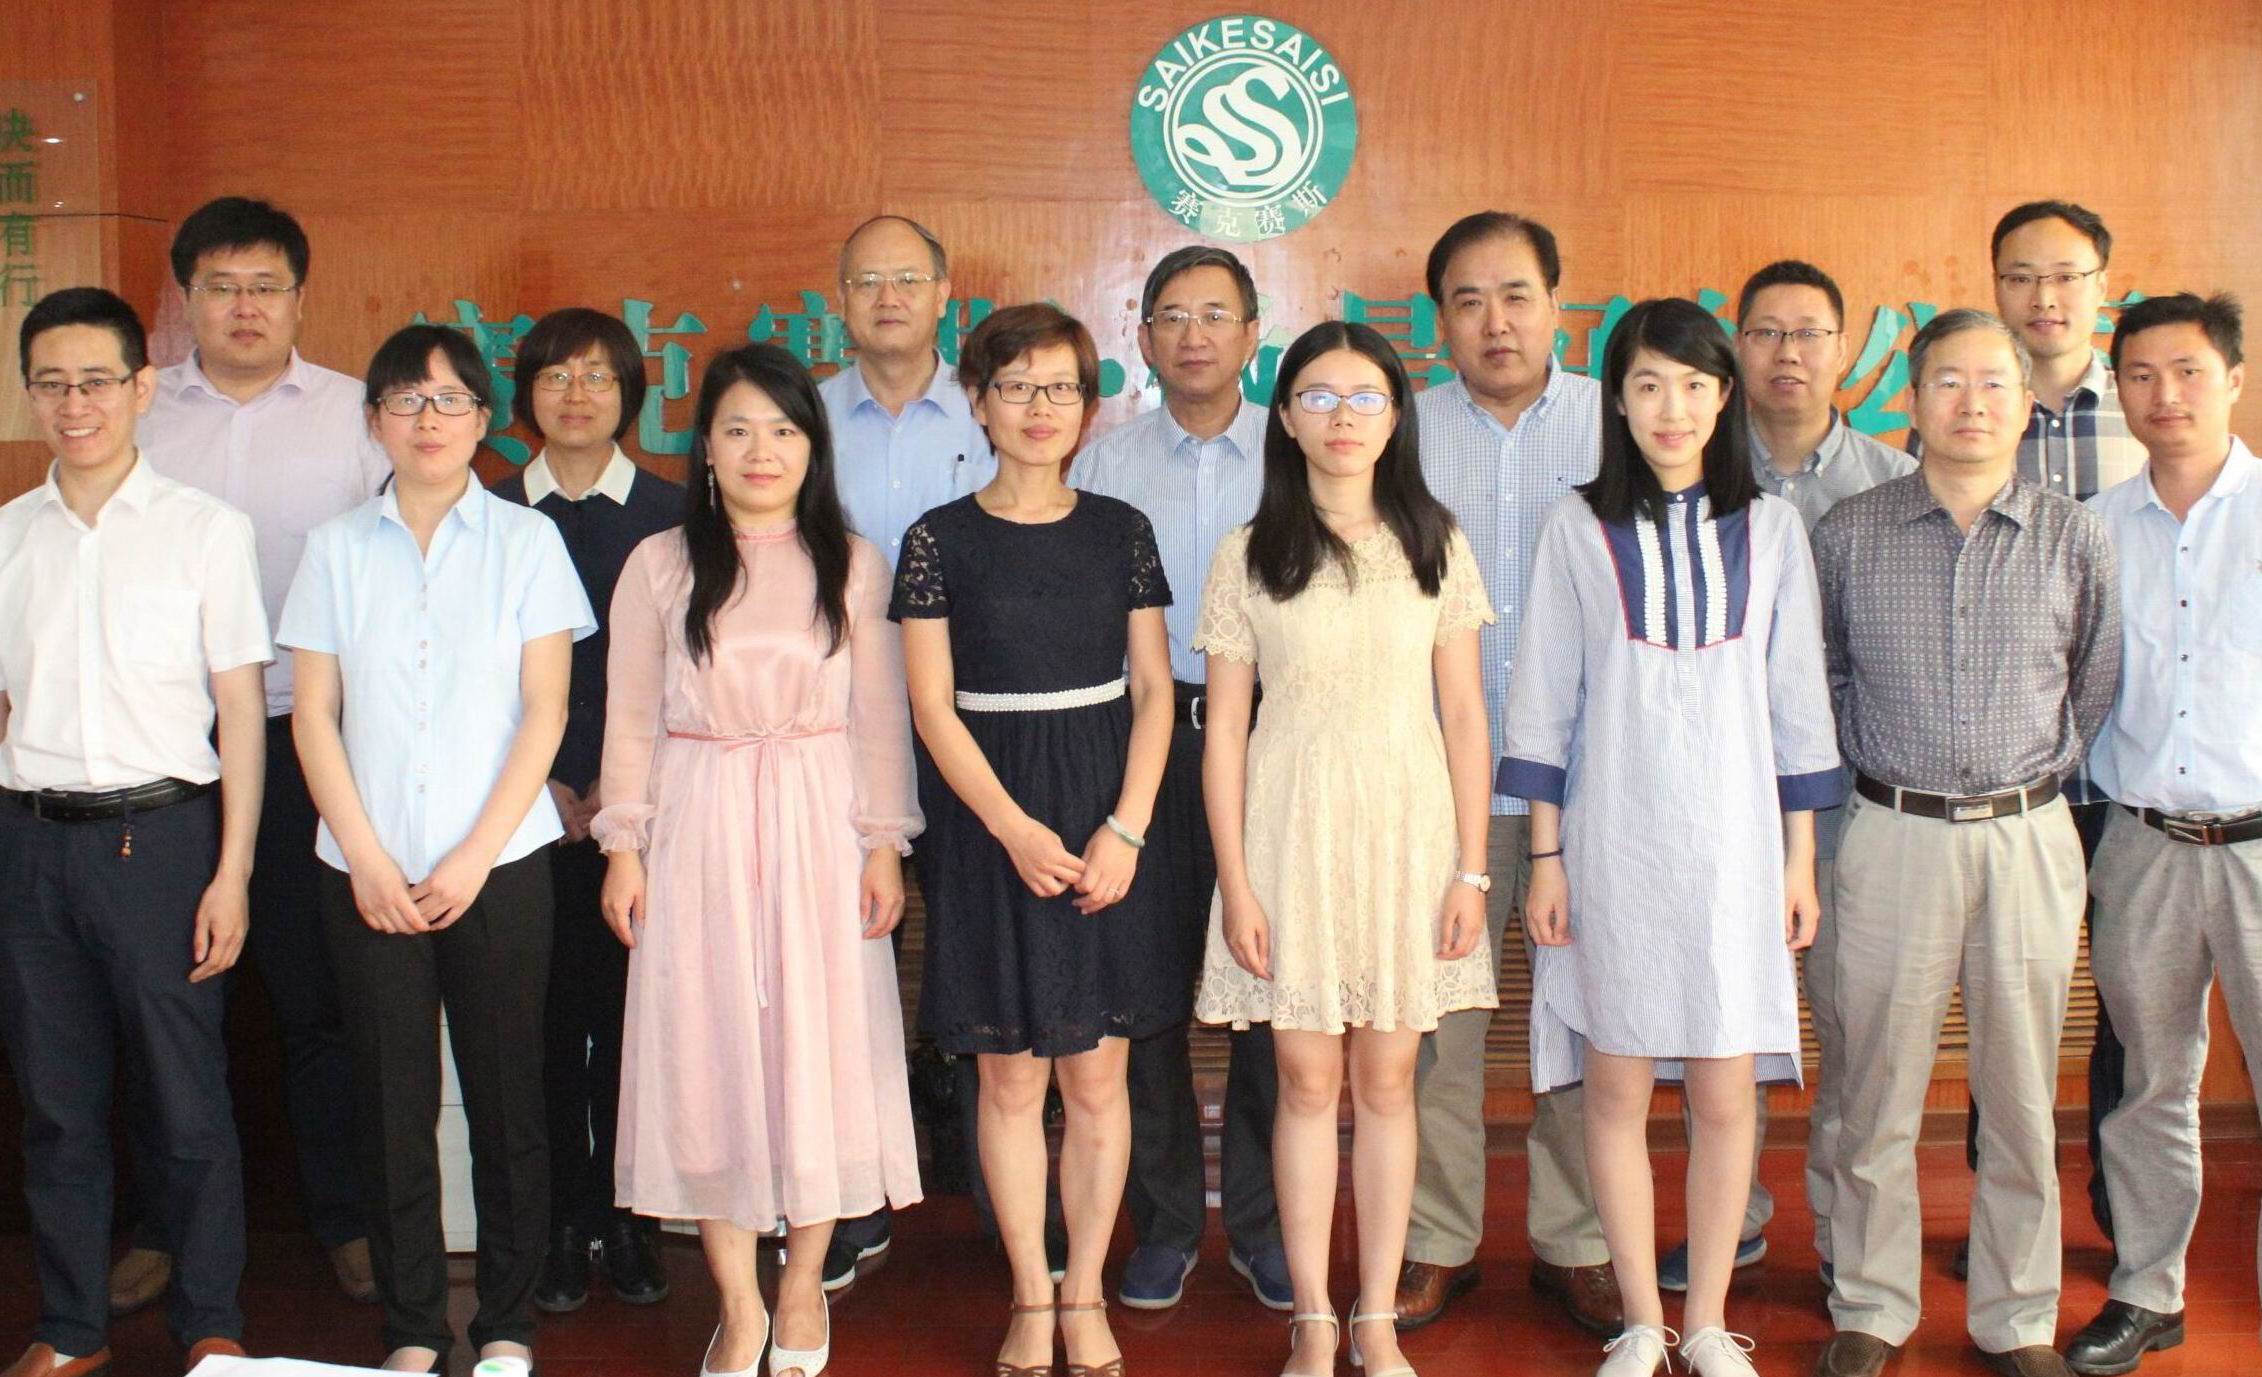 The finalization meeting of the book "Chitosan-based Marine Biomedical Materials" was held in our company.